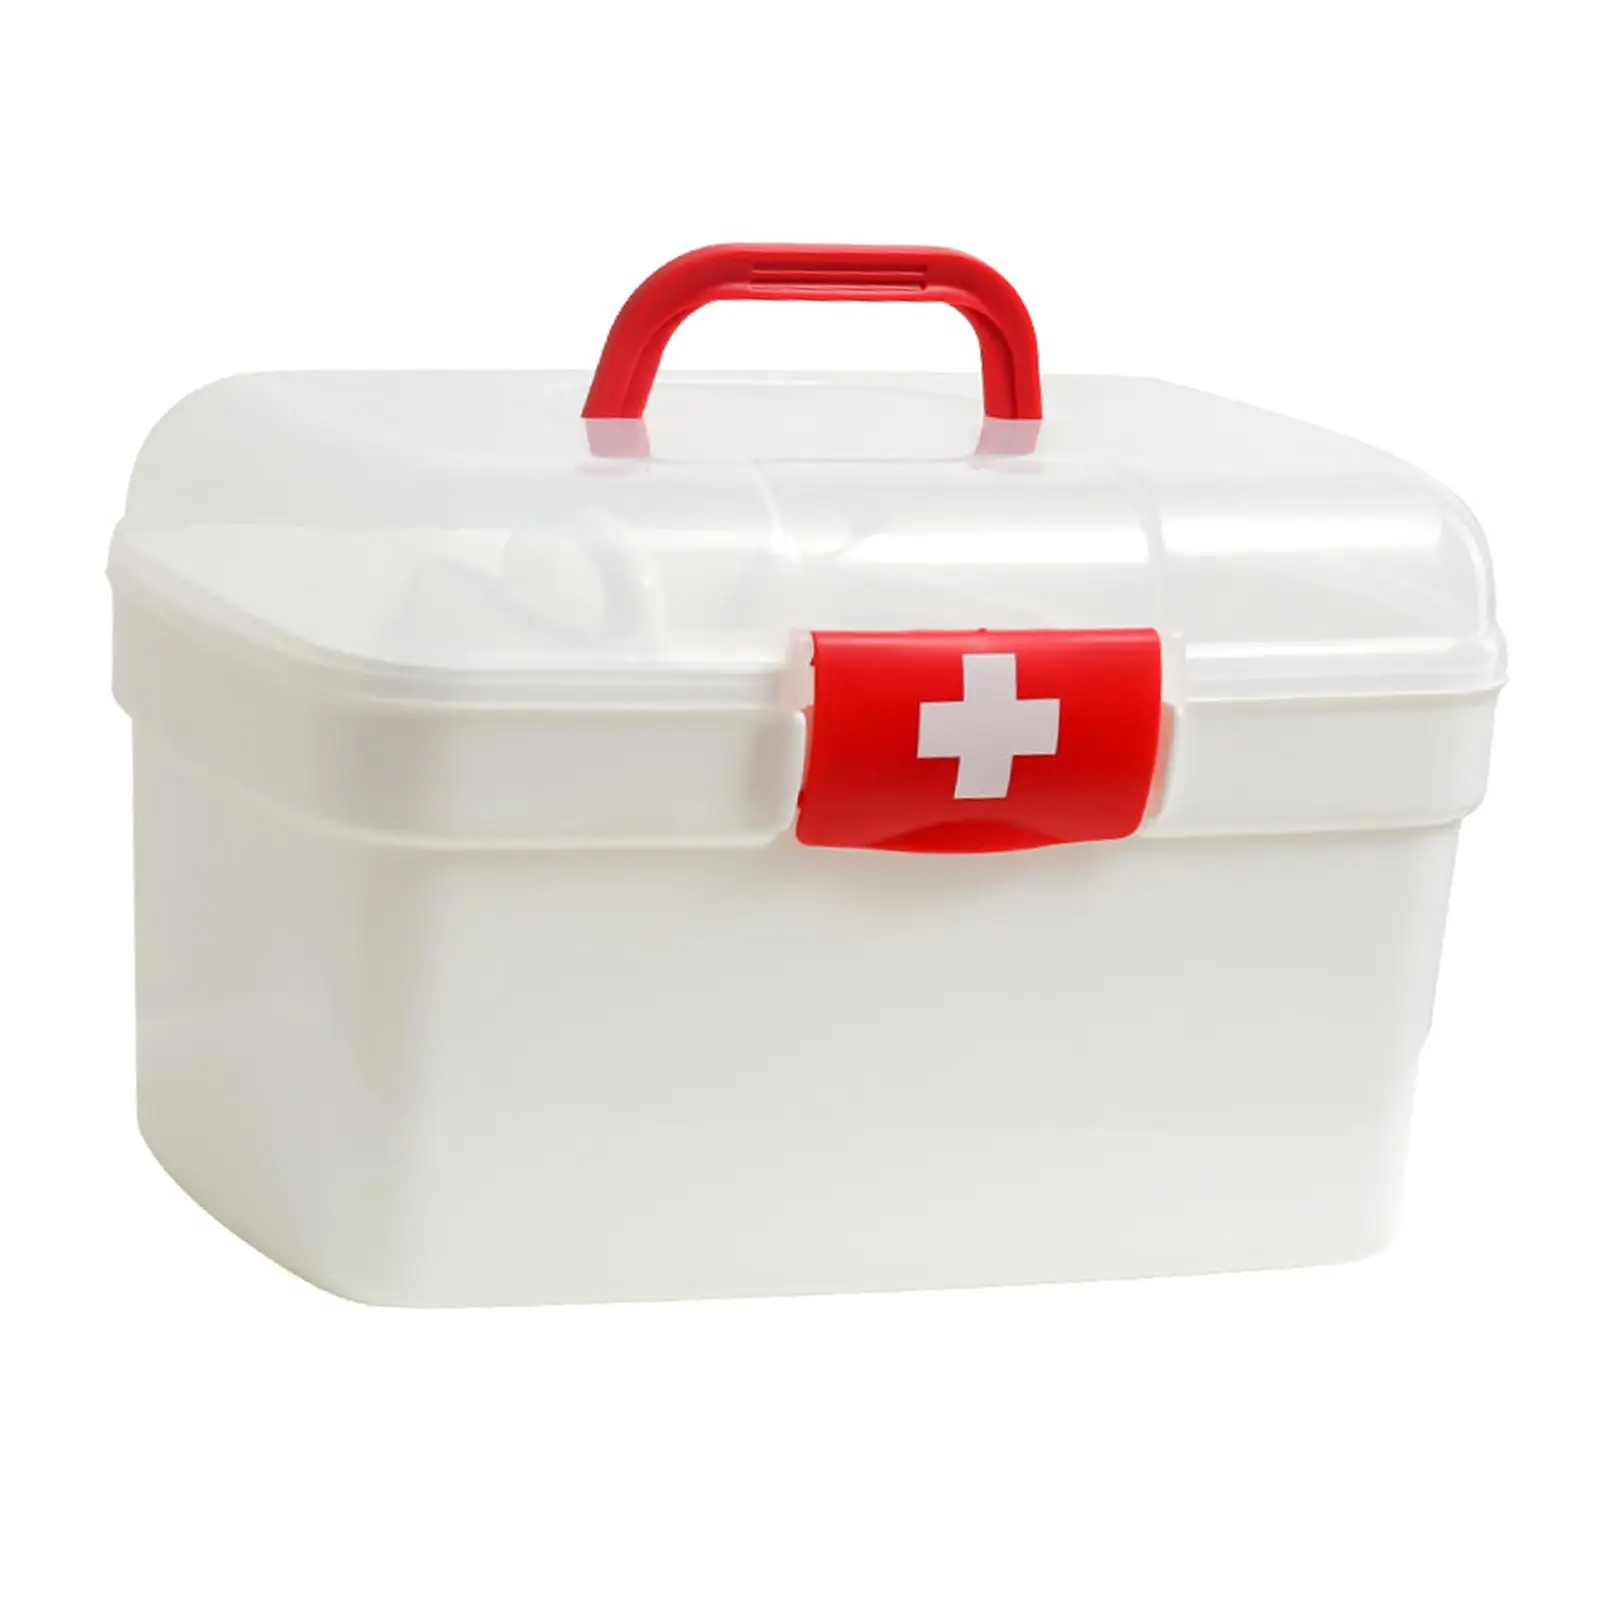 First Aid Storage Box Portable Bin for Outdoor Activities Office Travel